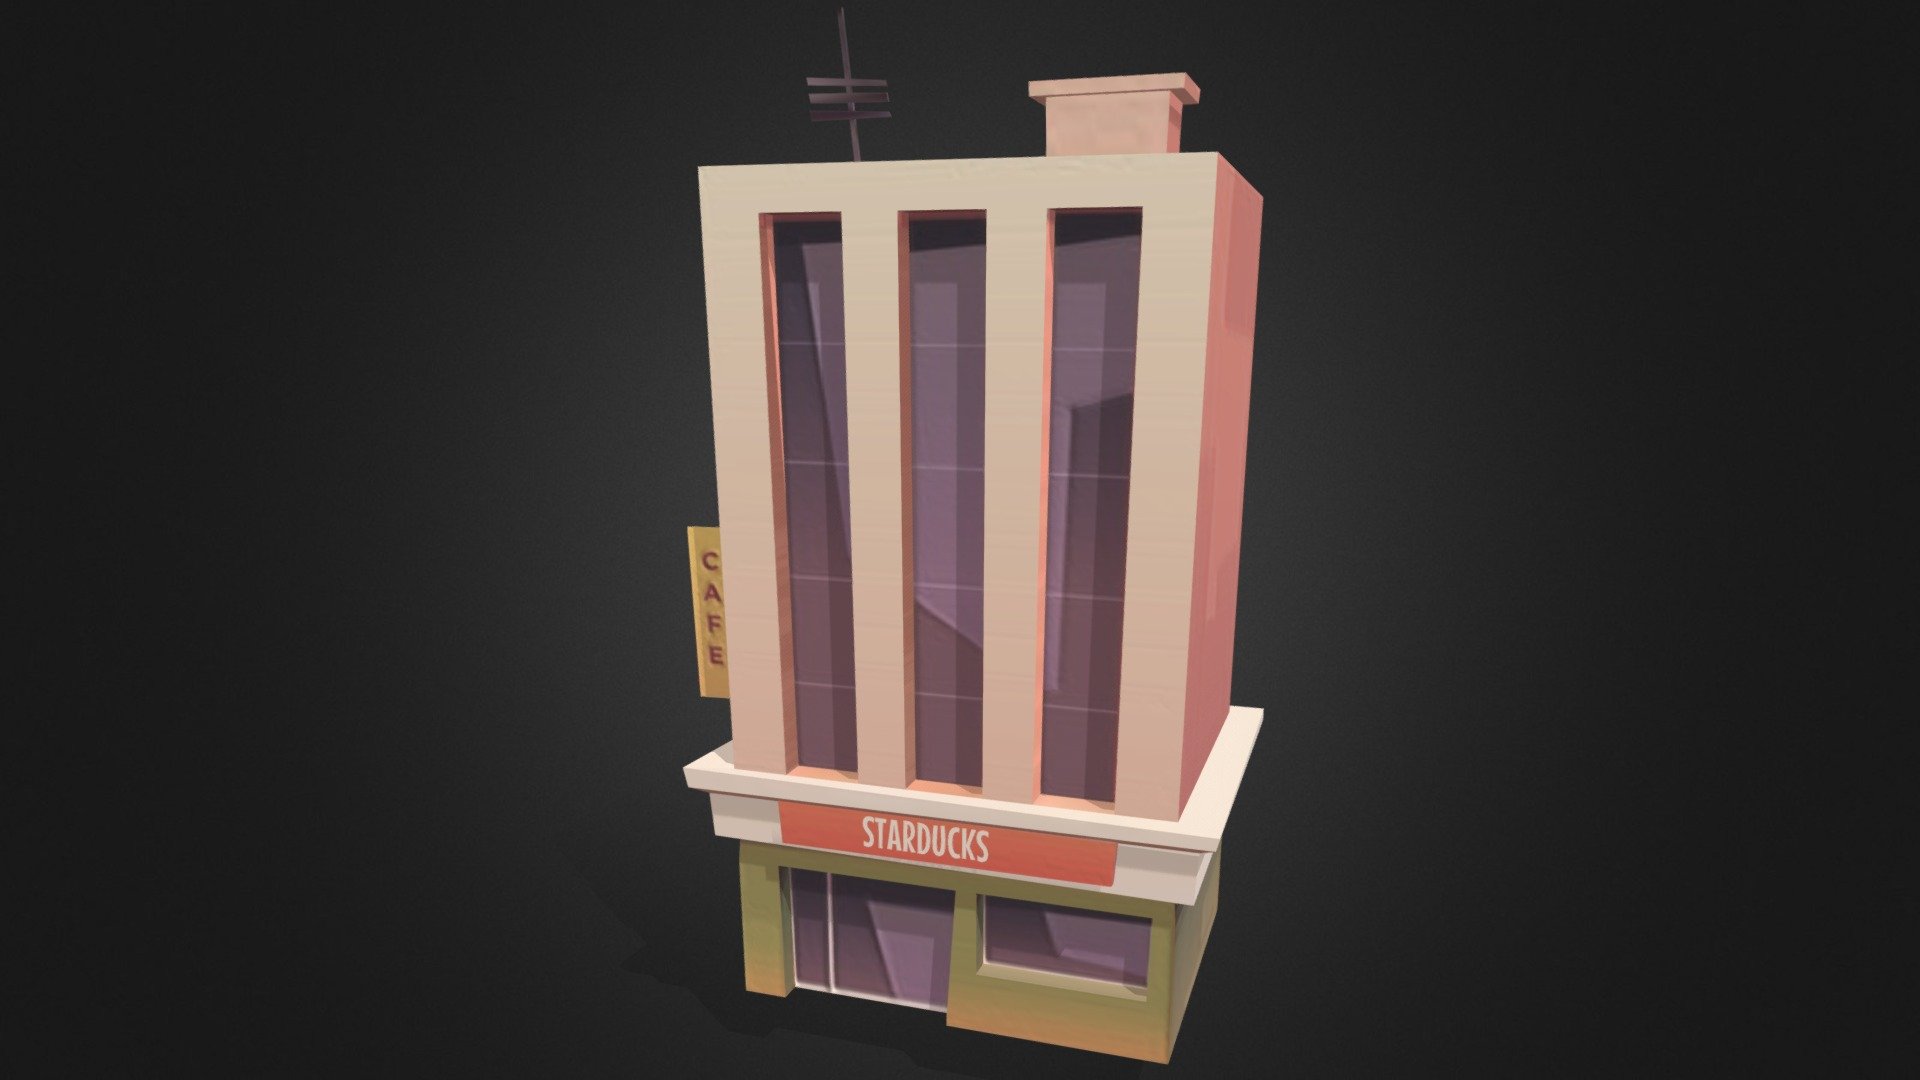 Lowpoly Stylize building with atlas base texture 
Its lowpoly ready to used for game - Building - 3D model by MangoGames 3d model